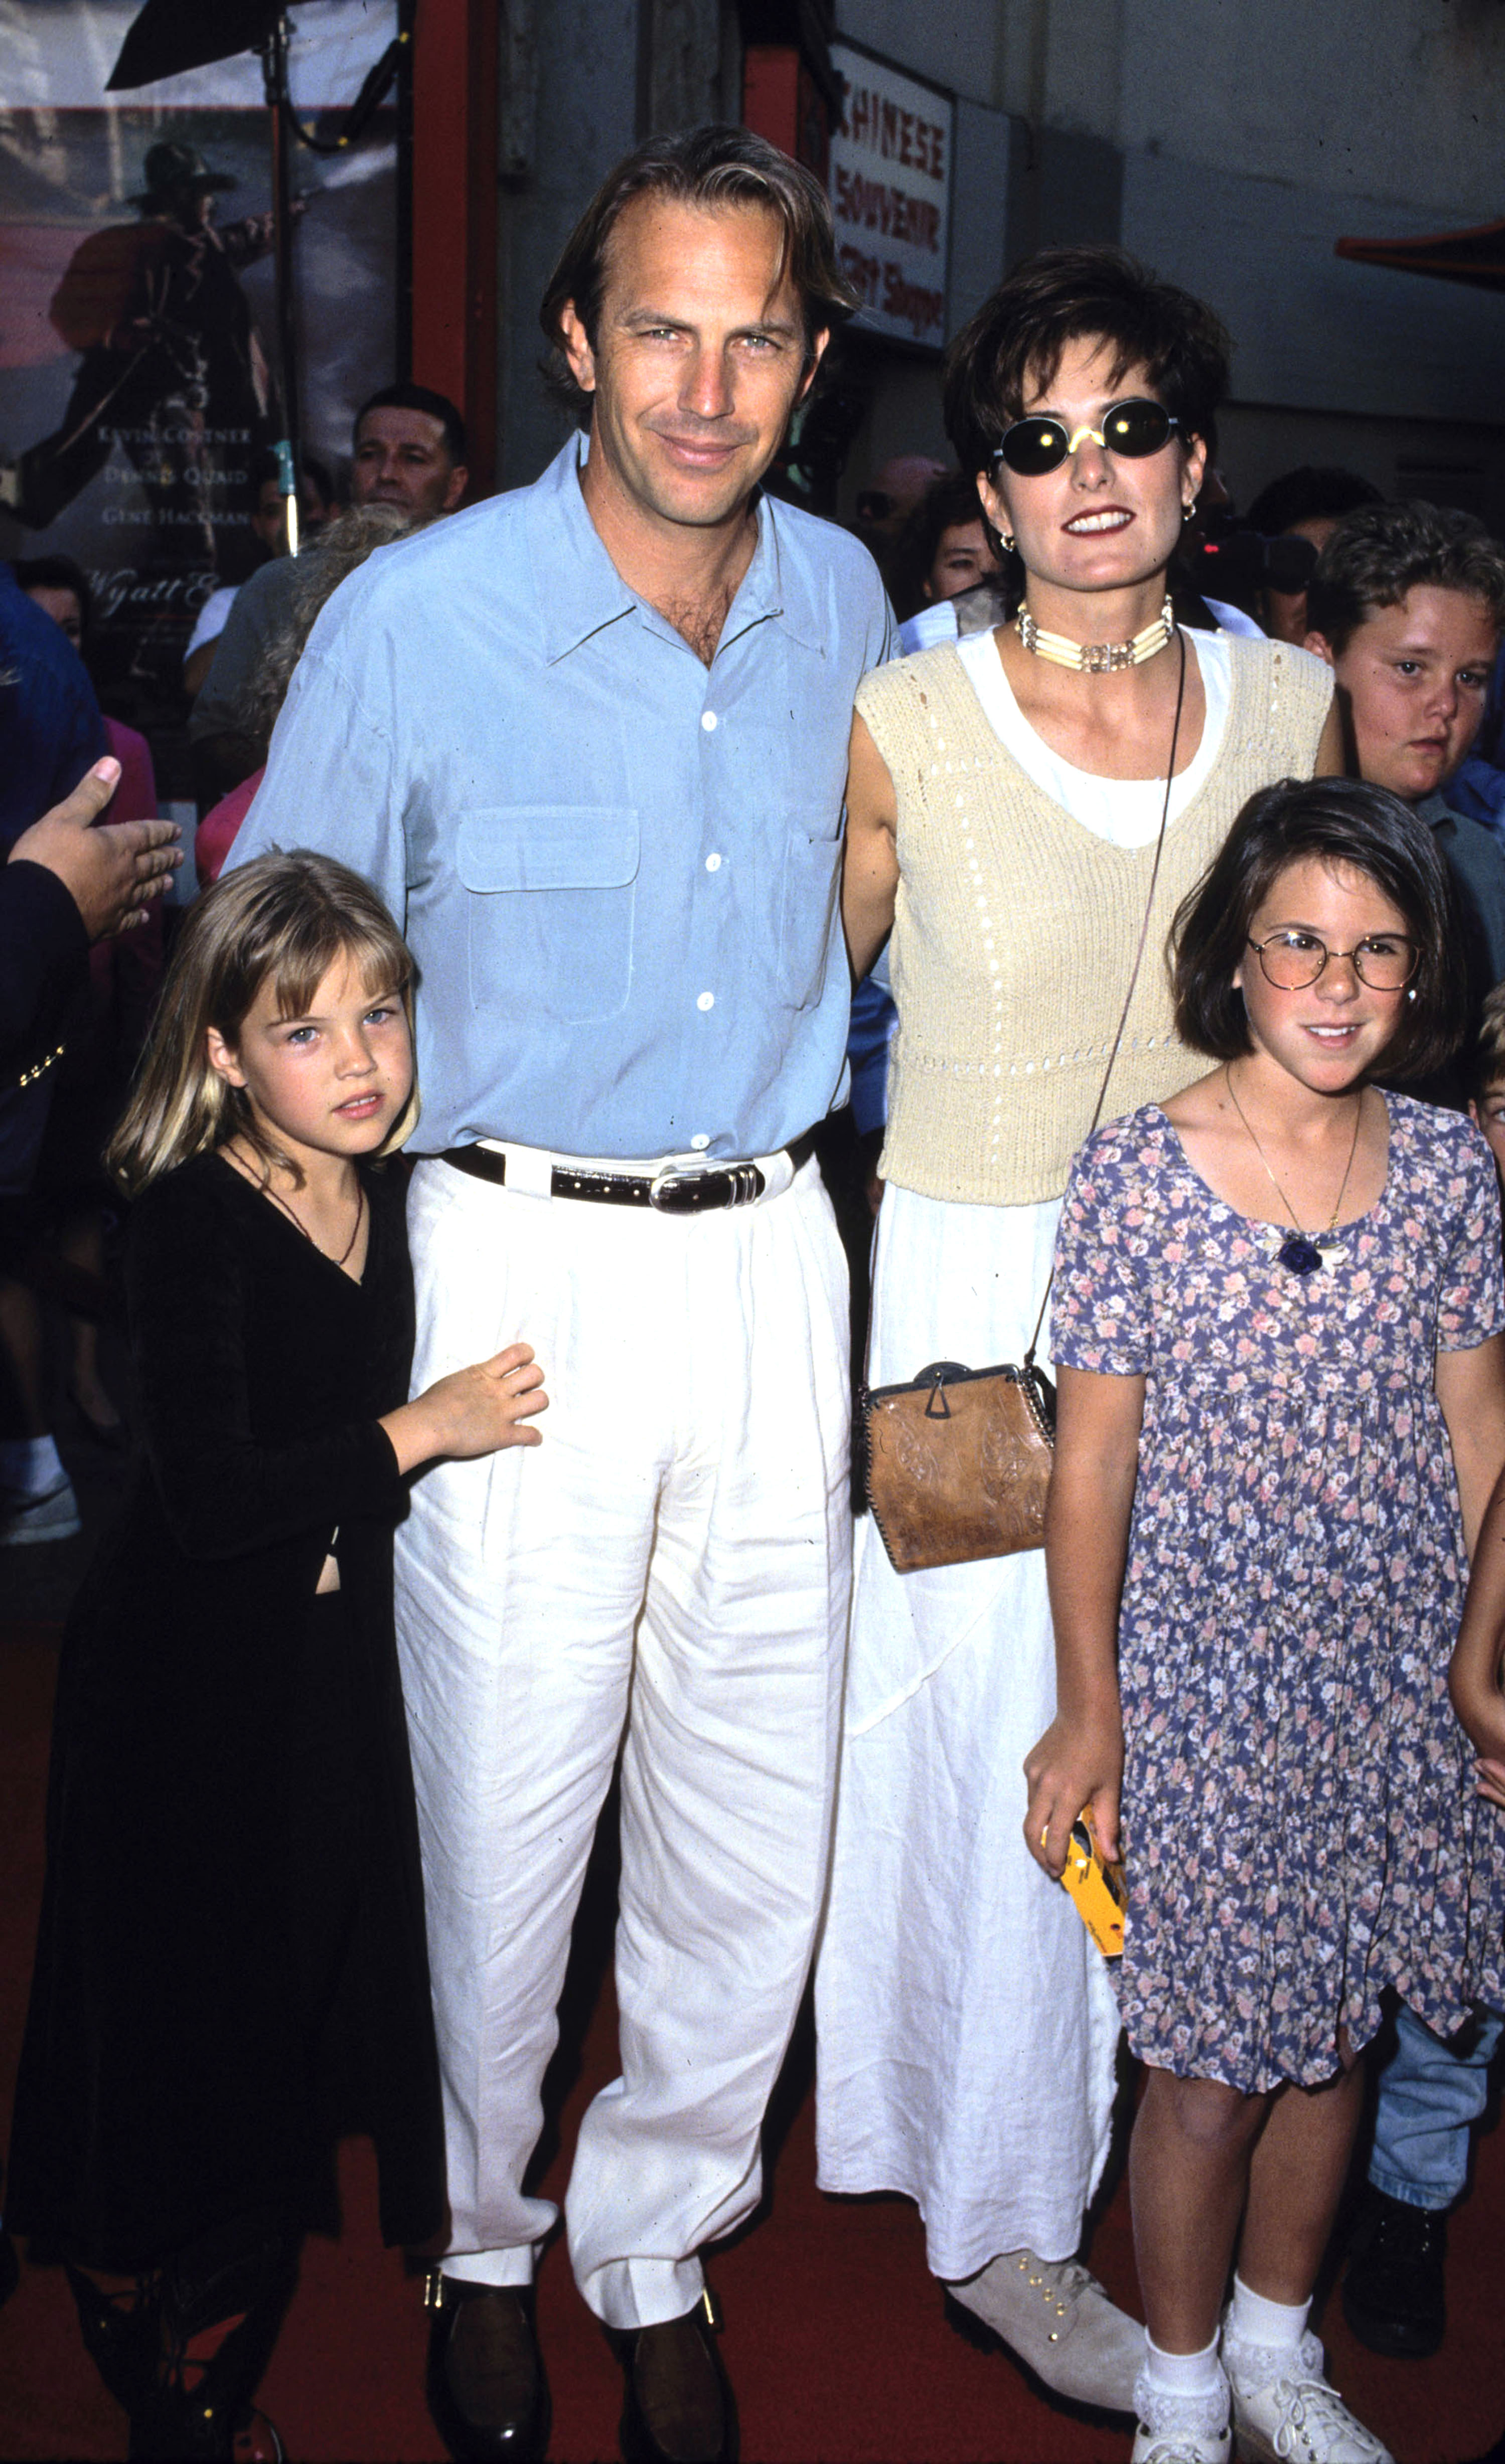 Kevin Costner, his wife Cindy, and their children Anne, Lily, and Joe at the "Wyatt Earp" Los Angeles premiere on June 18, 1994 | Source: Getty Images